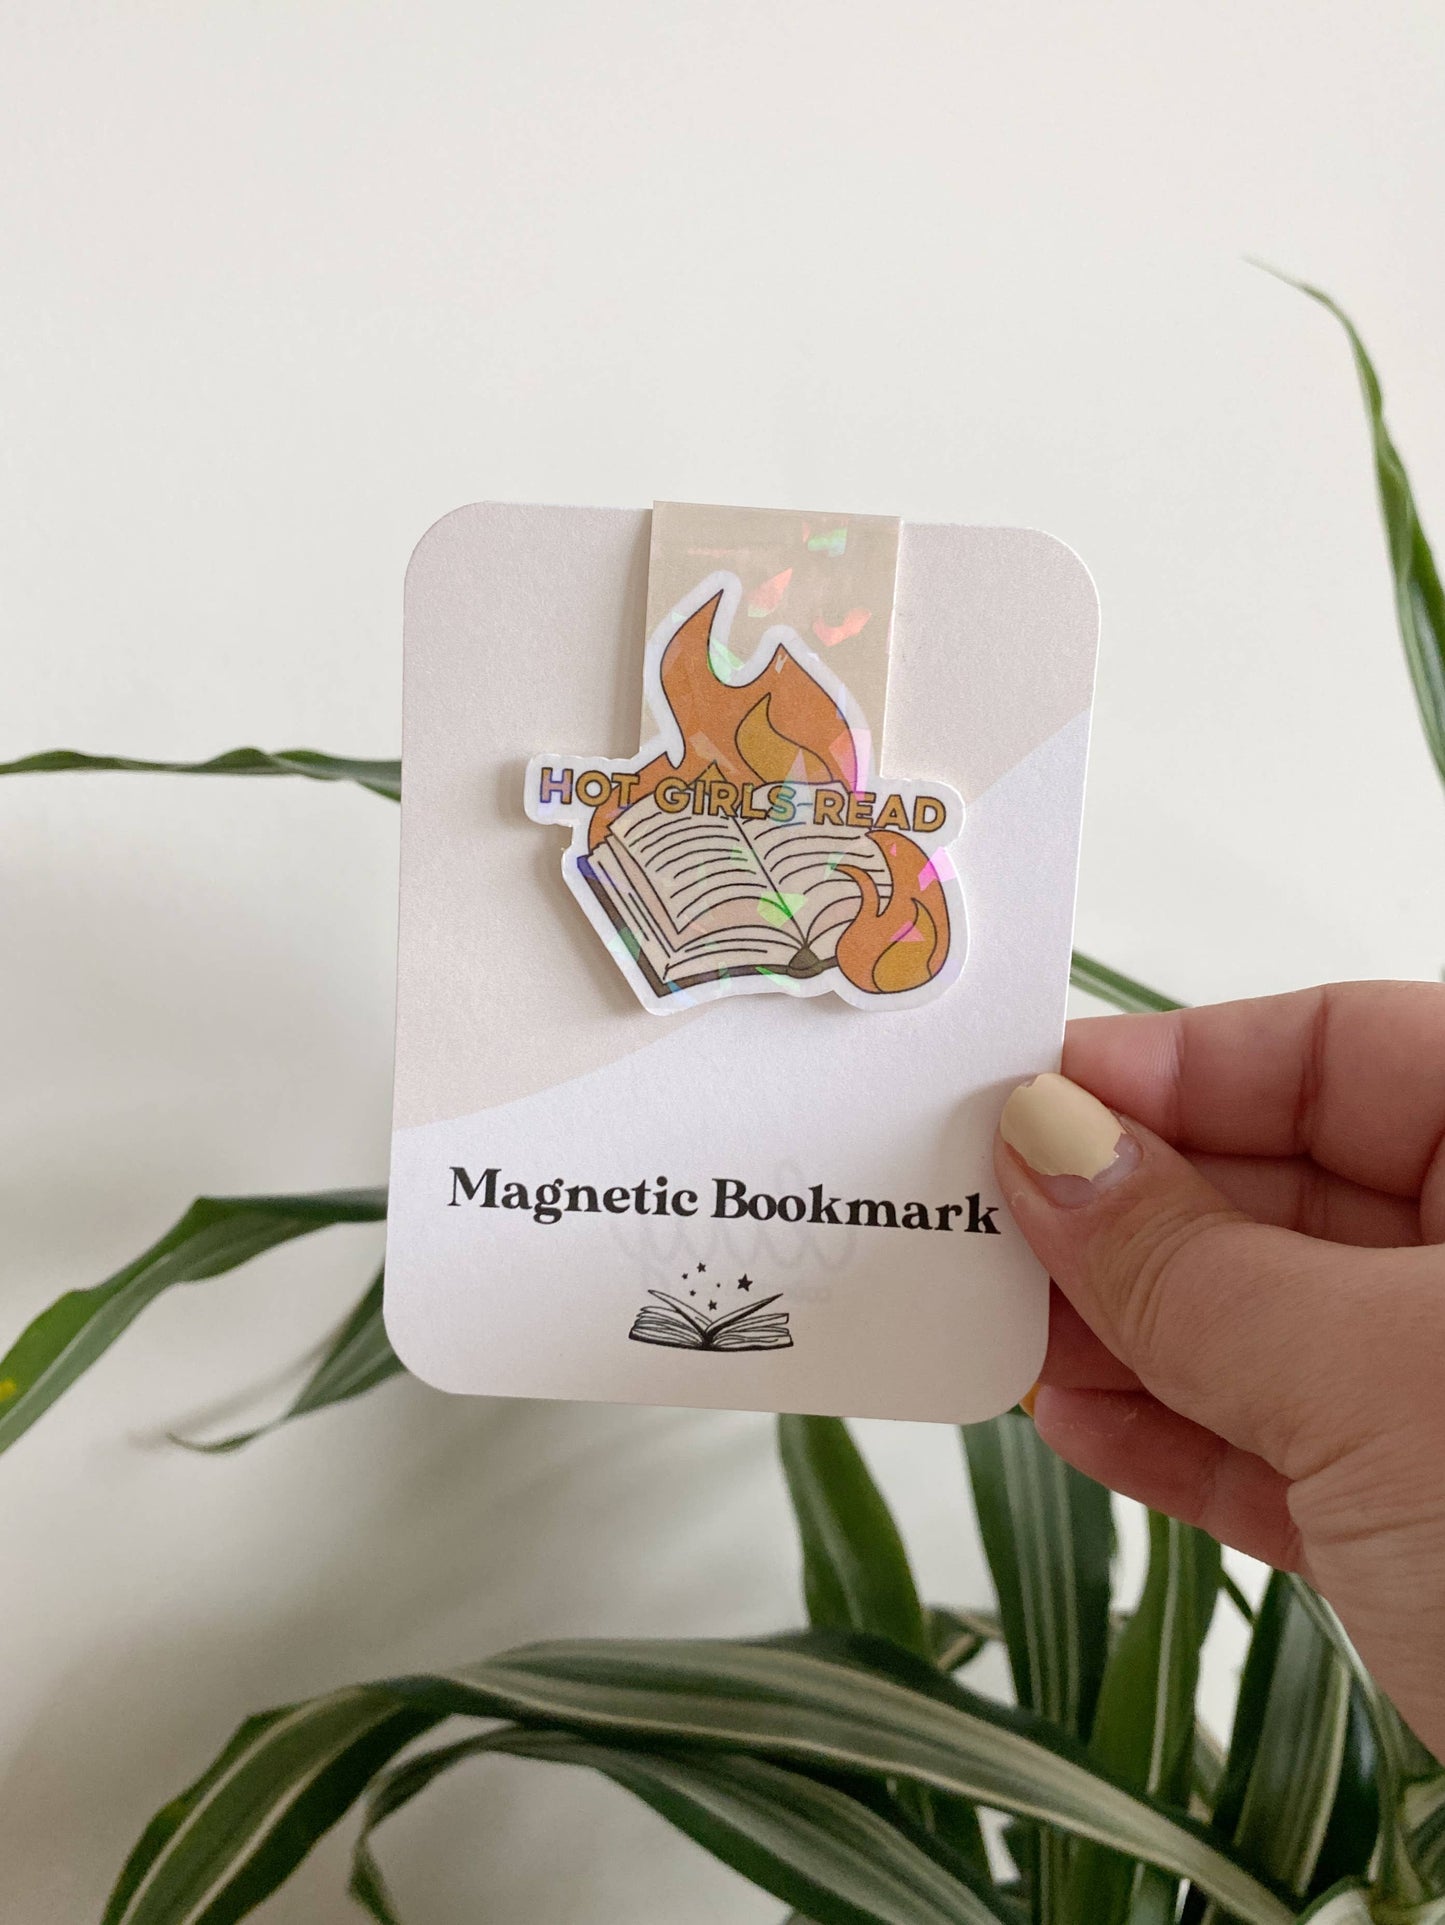 Hot Girls Read  Magnetic Bookmark - Storm and Sky Shoppe